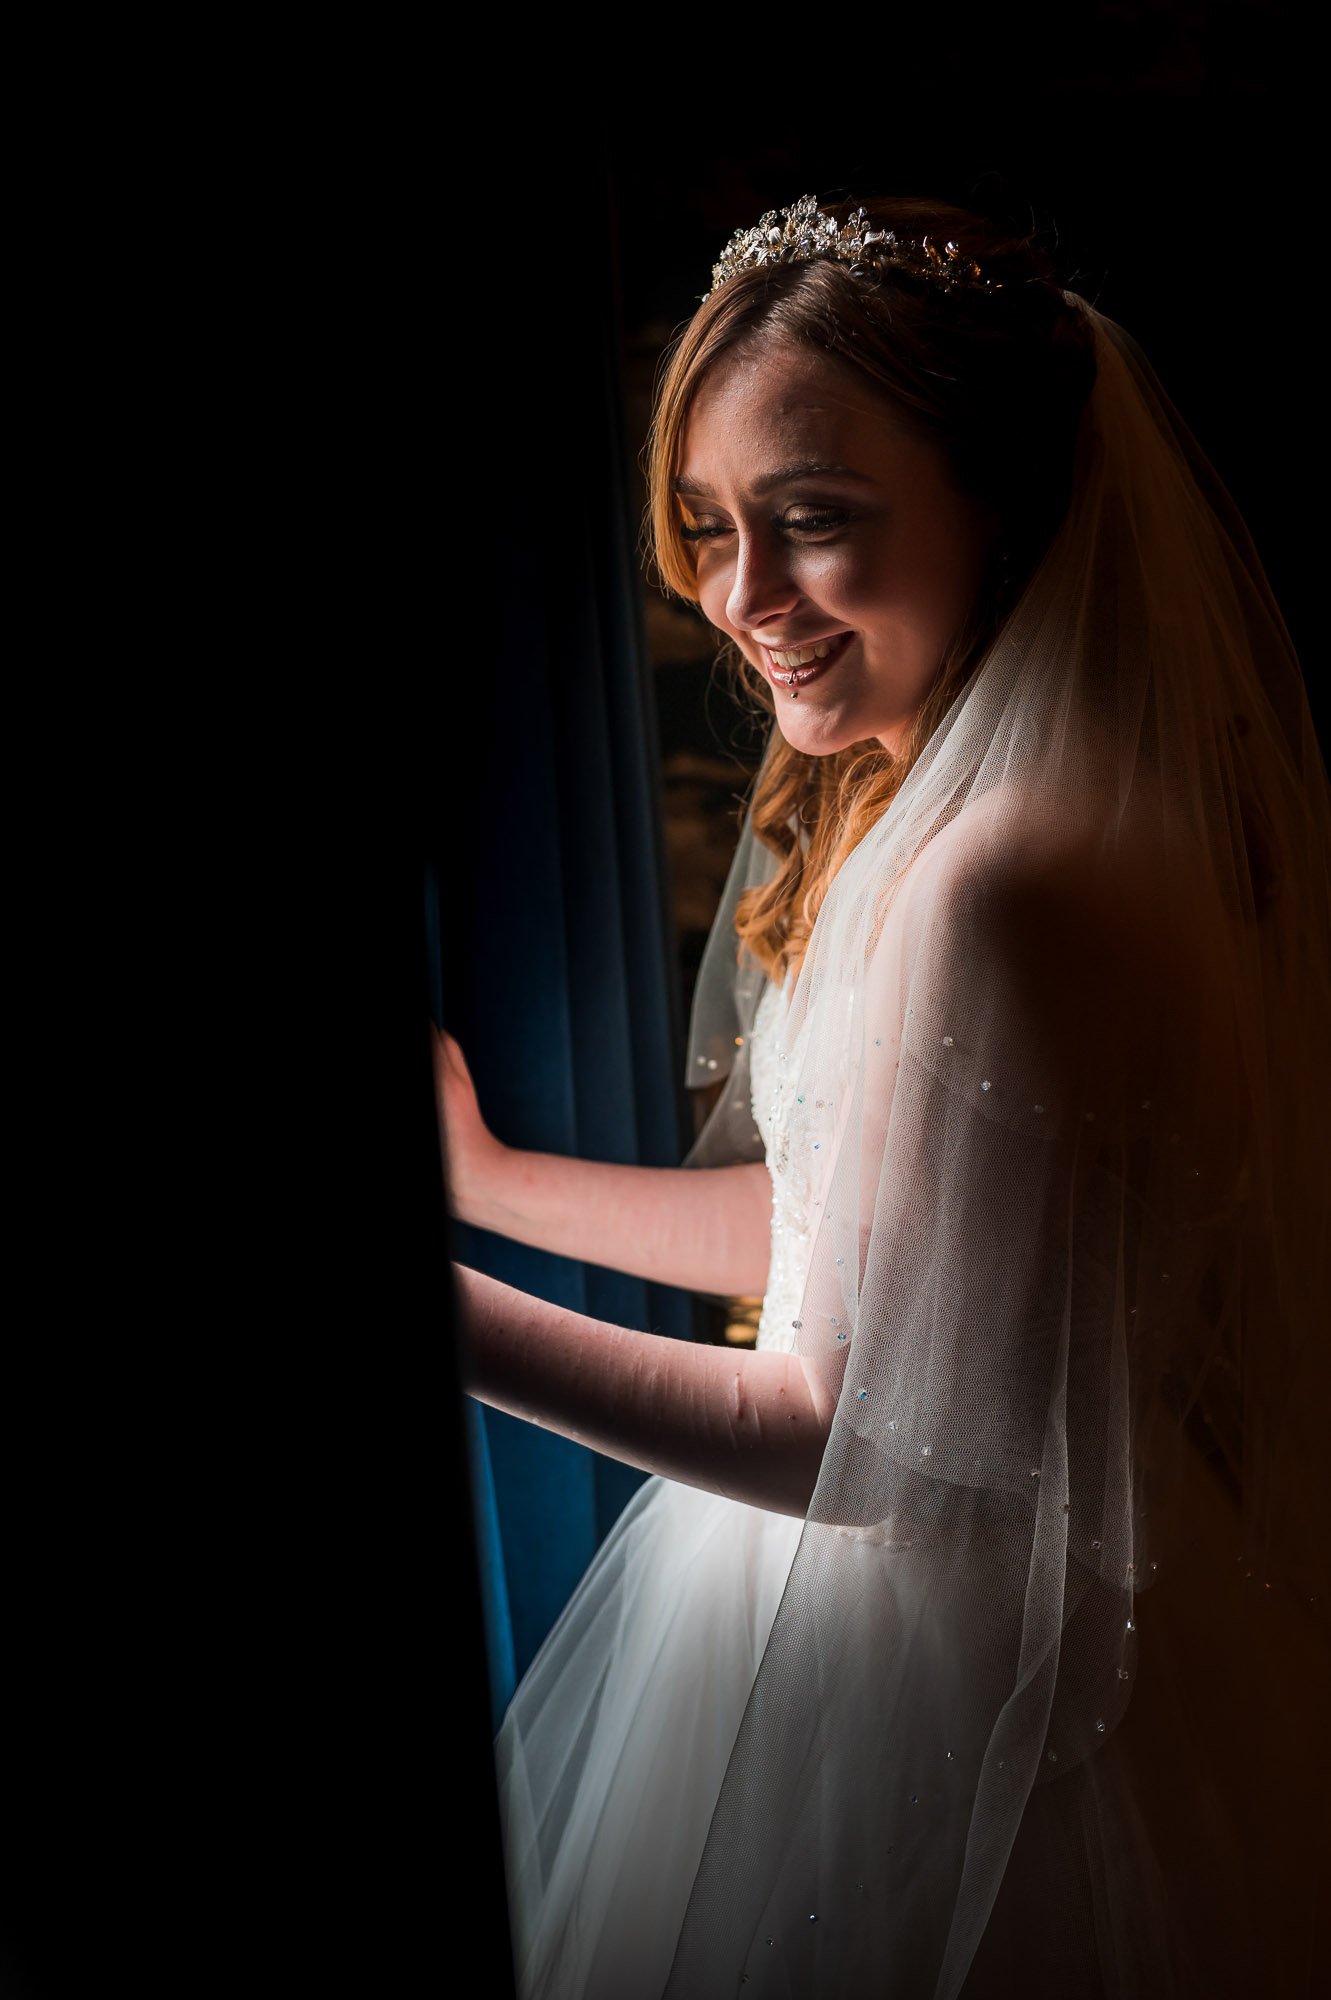 Bride at the window looking down